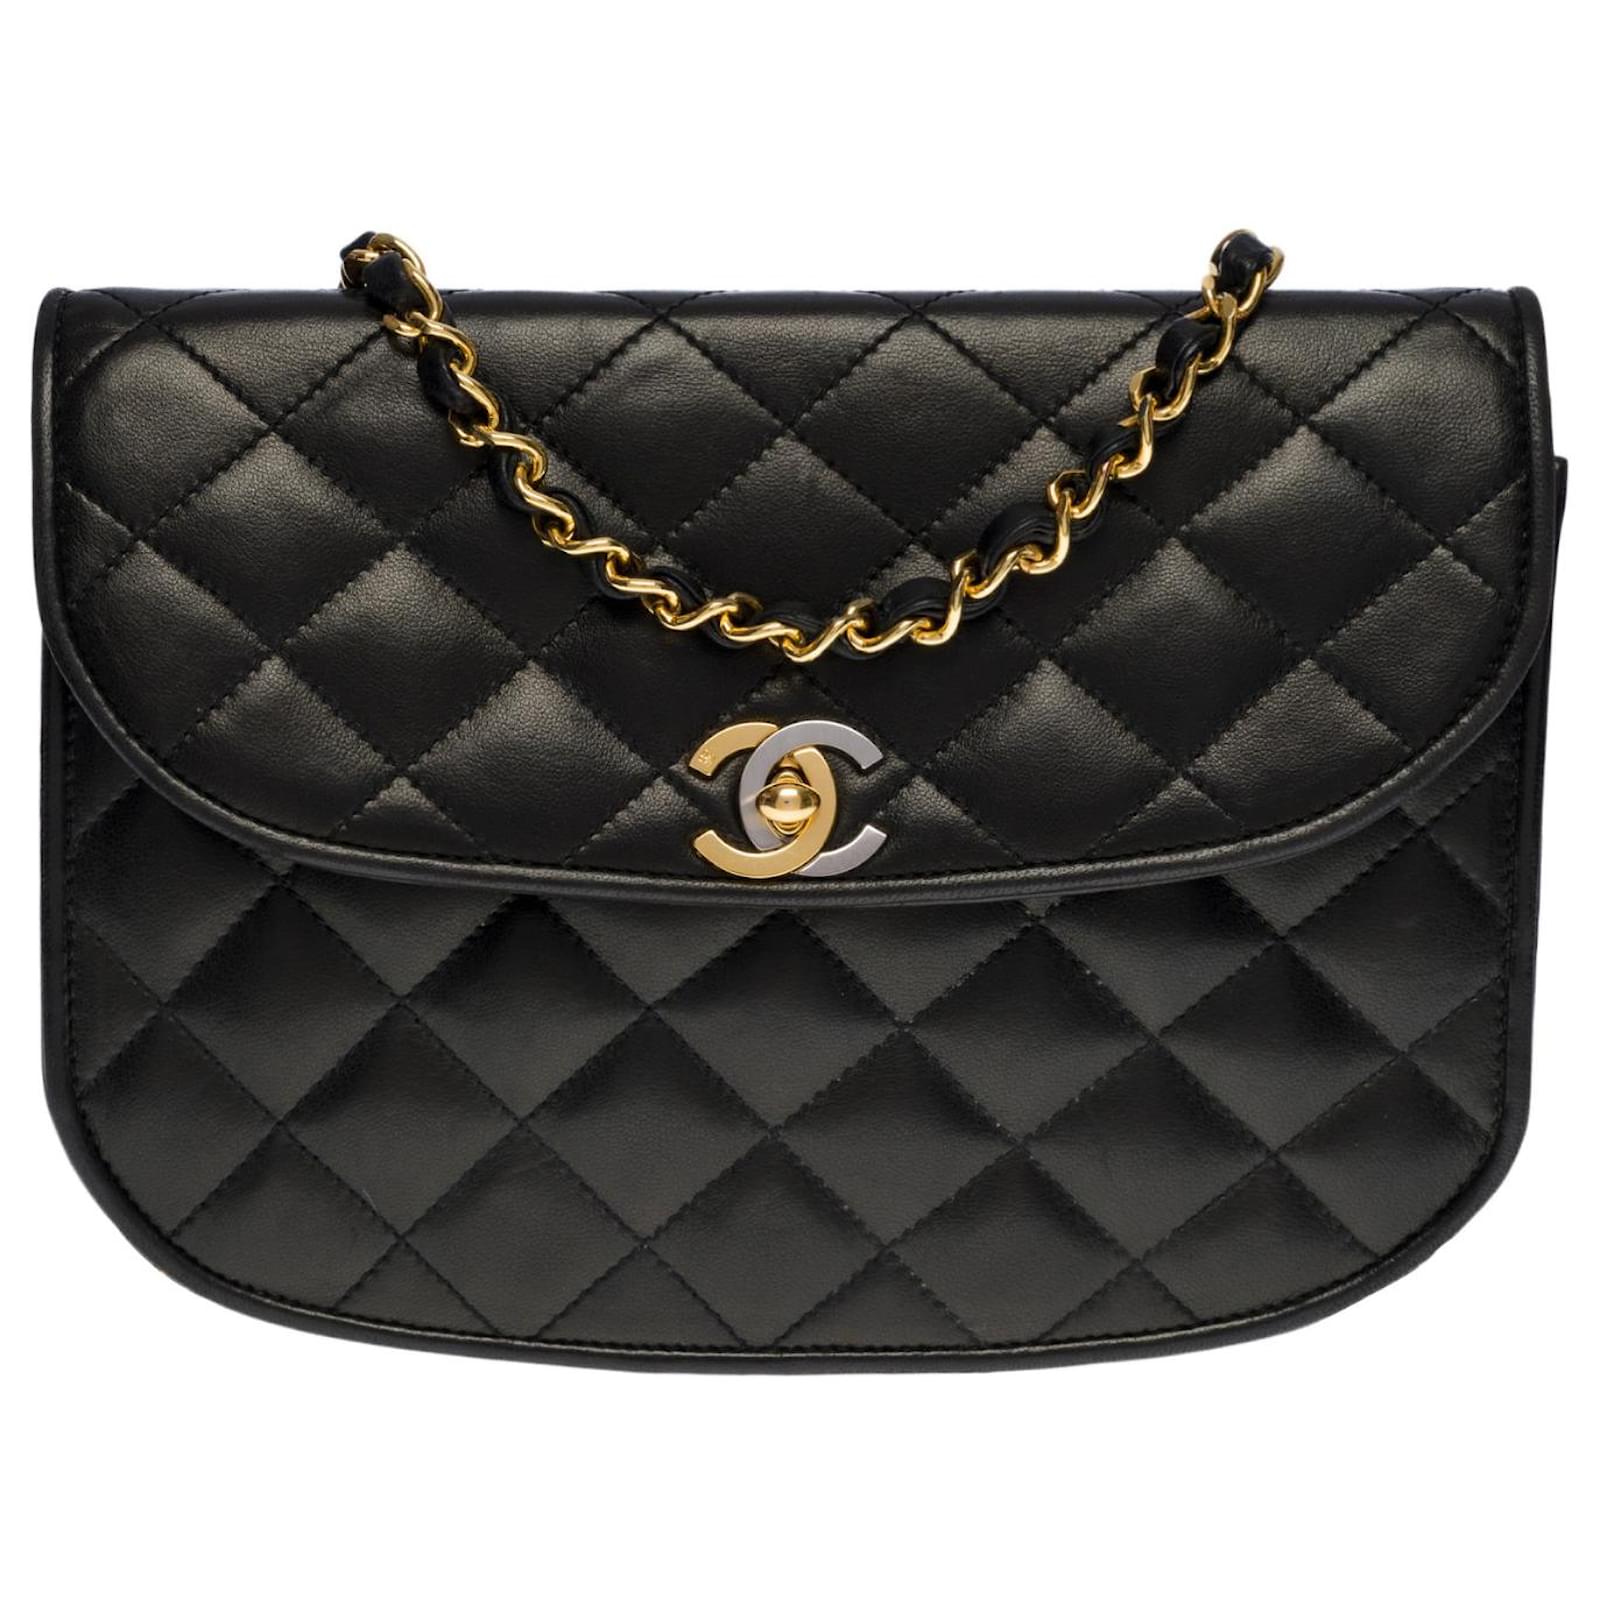 Timeless Very chic Chanel Classic flap bag in black quilted